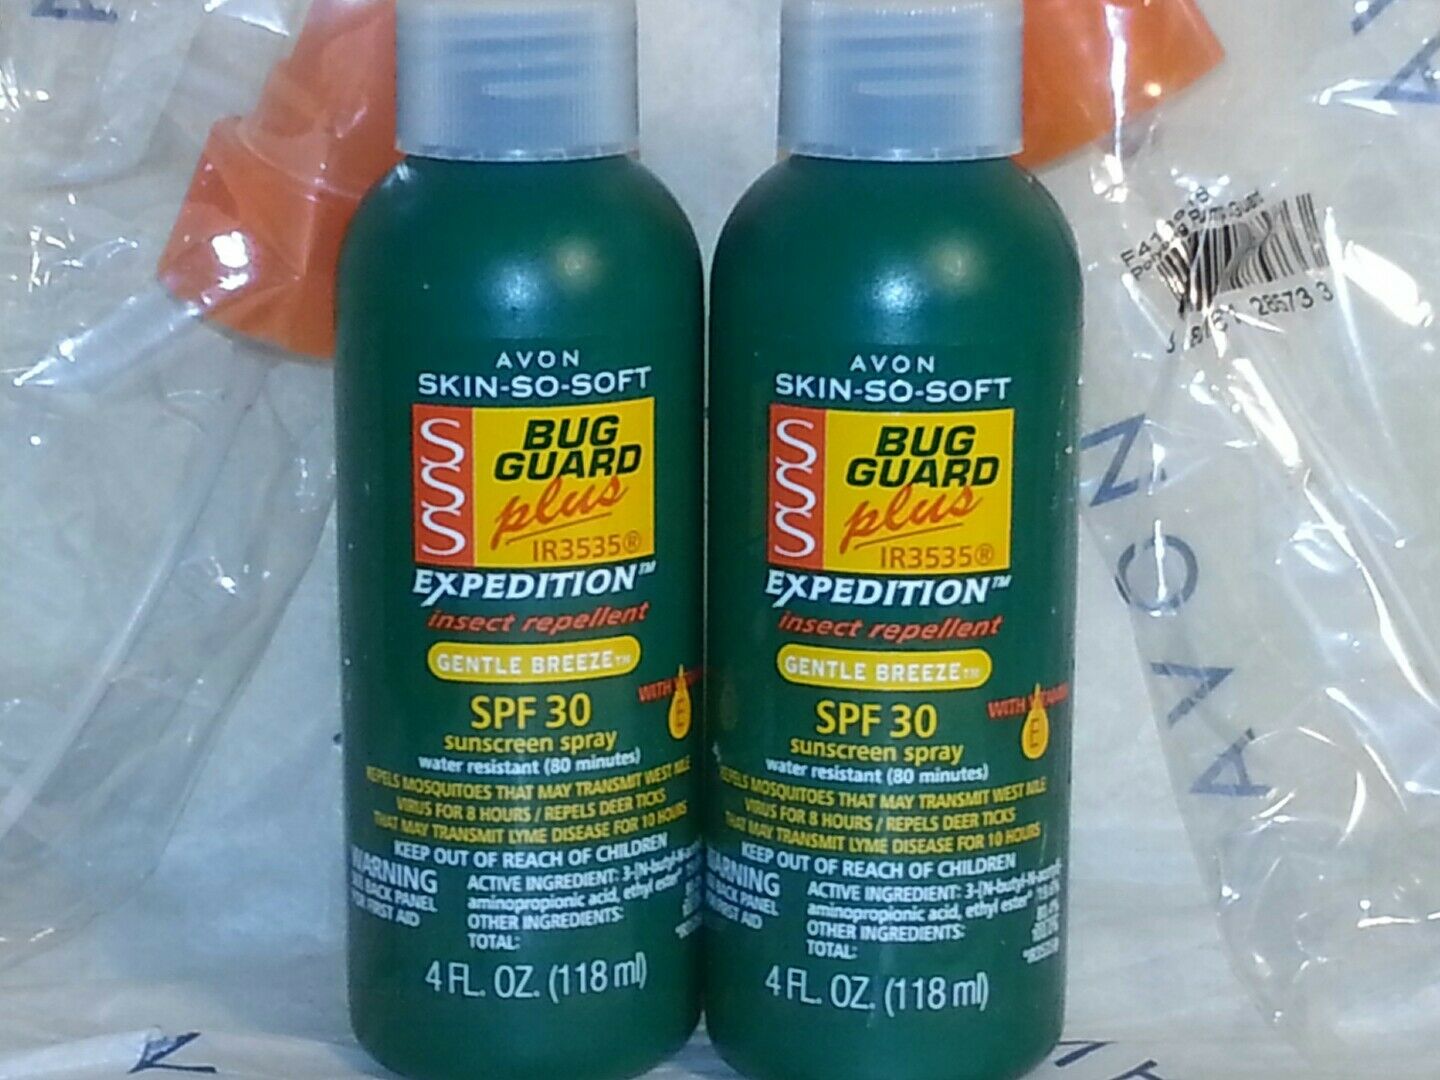 Avon Skin So Soft Sss Bug Guard Insect Repellent & Sunscreen Spf 30  Lot Of 2